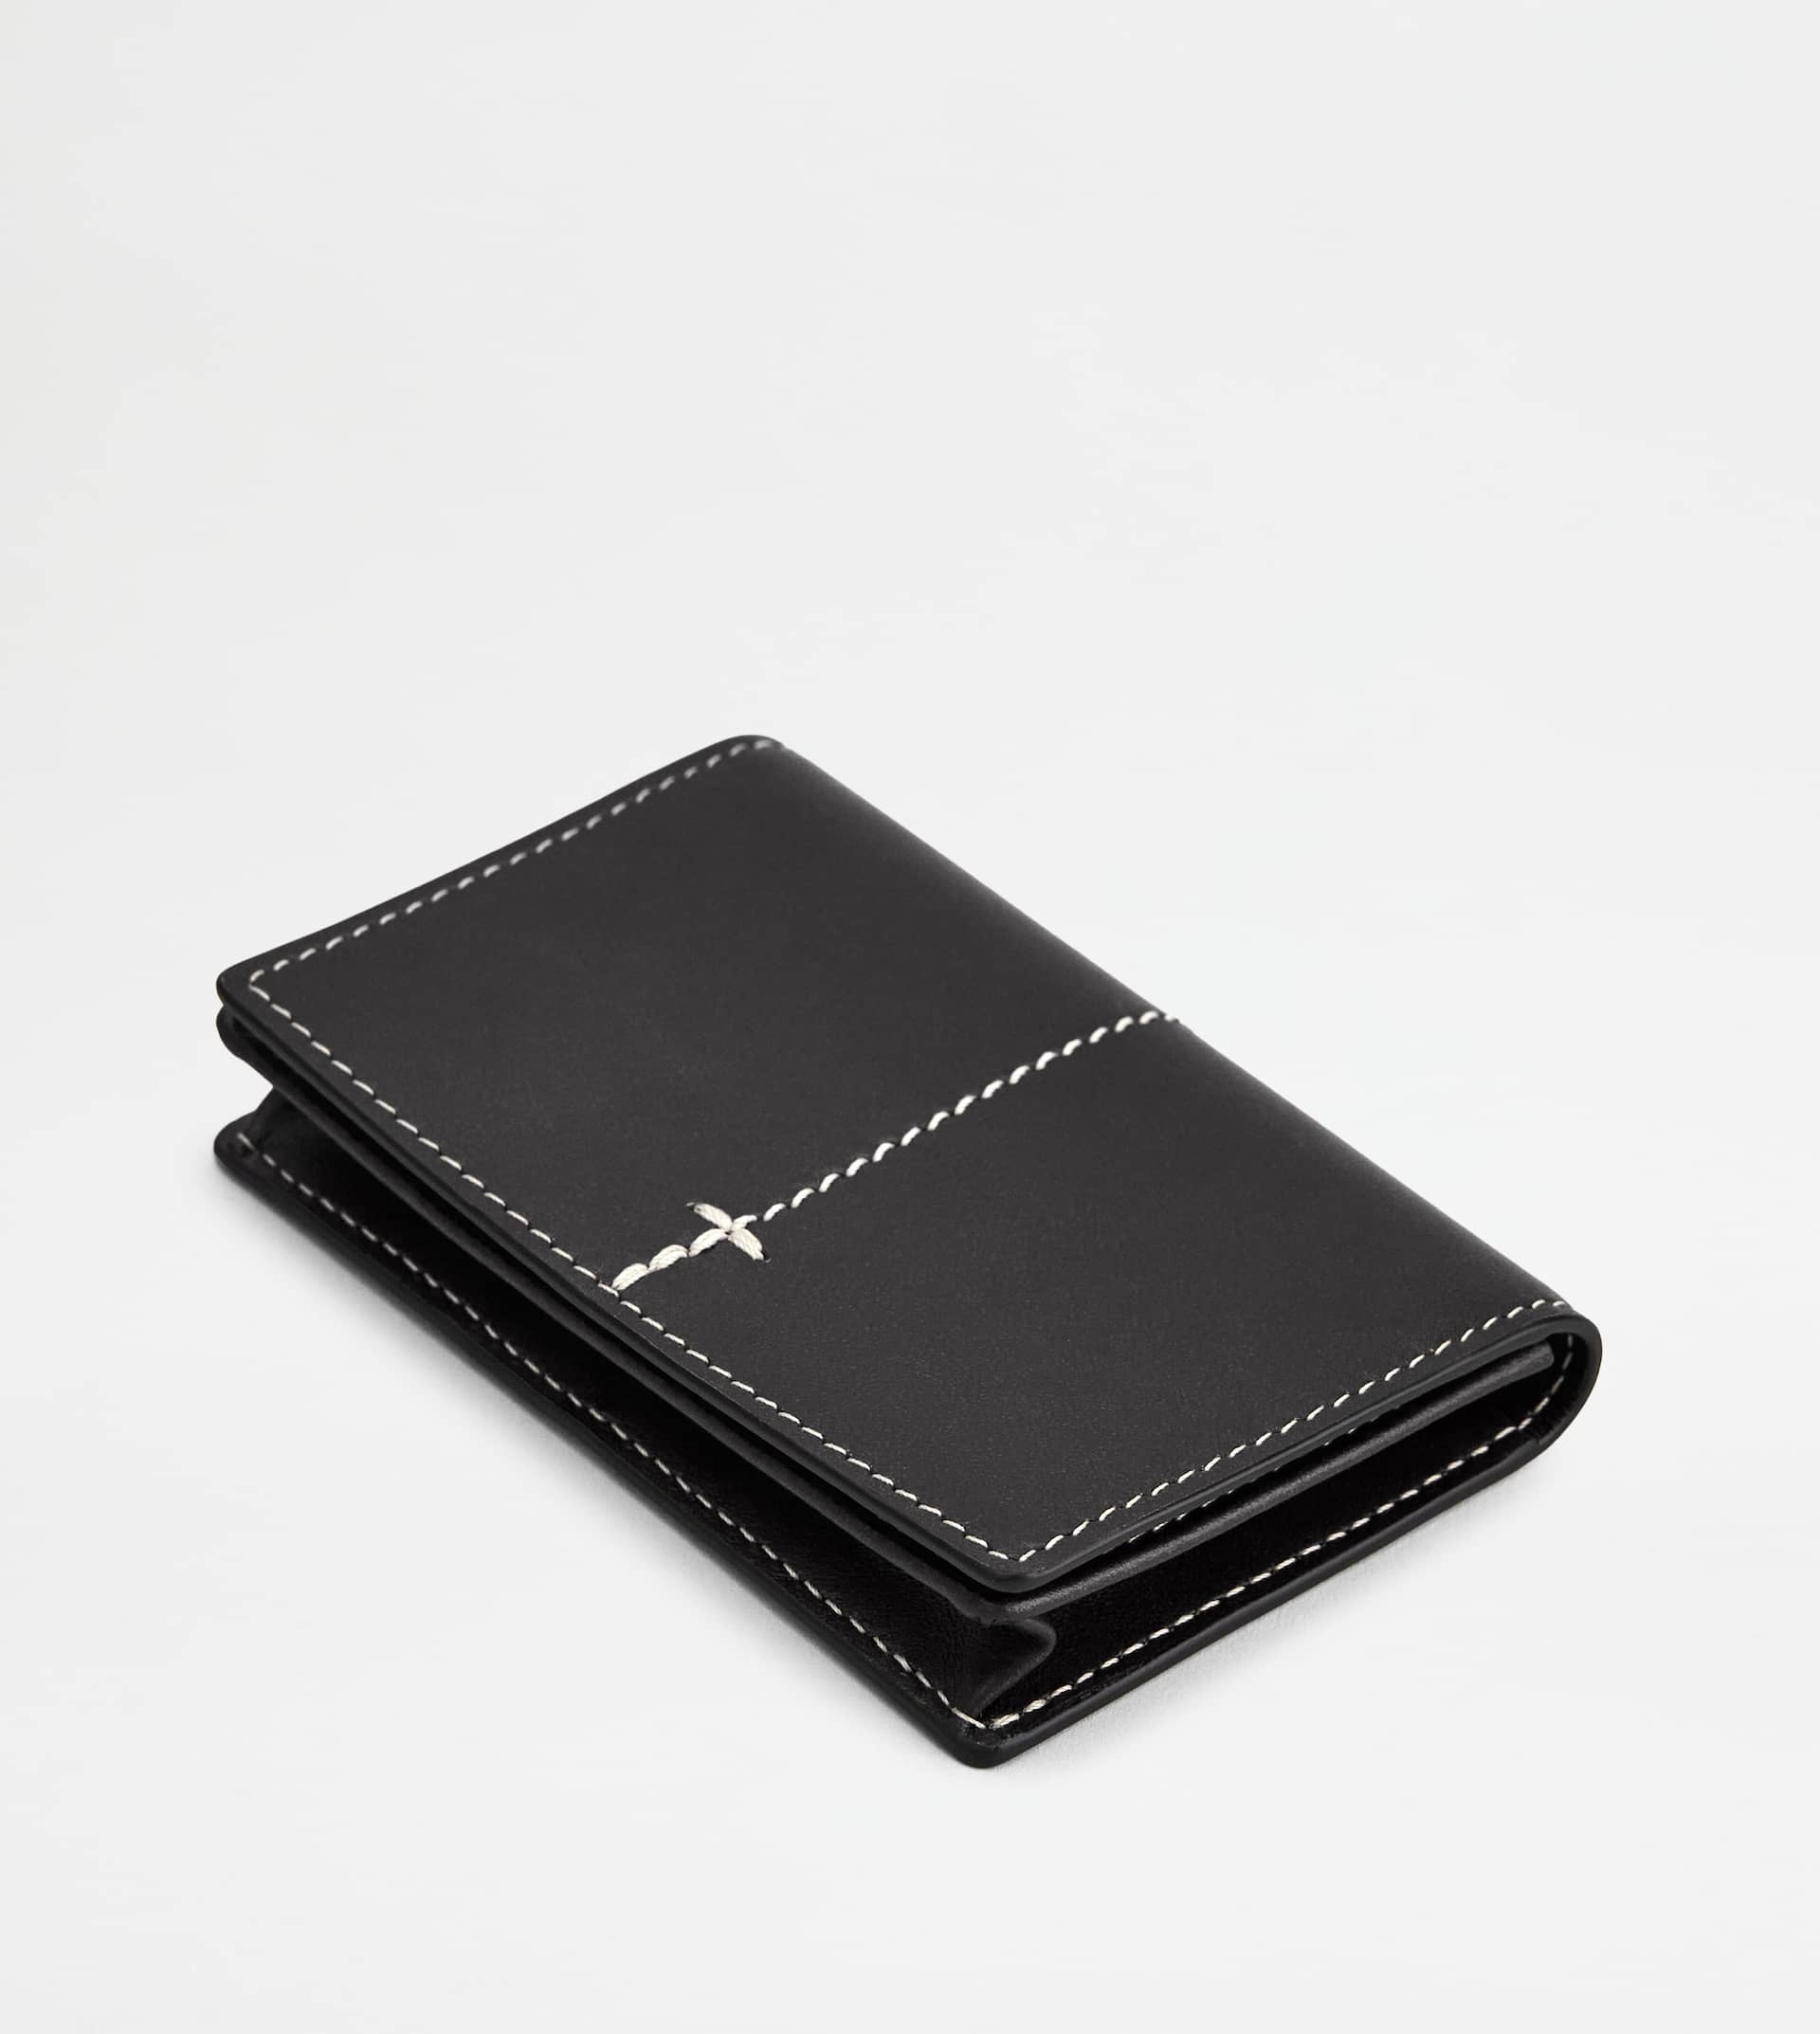 BUSINESS CARD HOLDER IN LEATHER - BLACK - 4